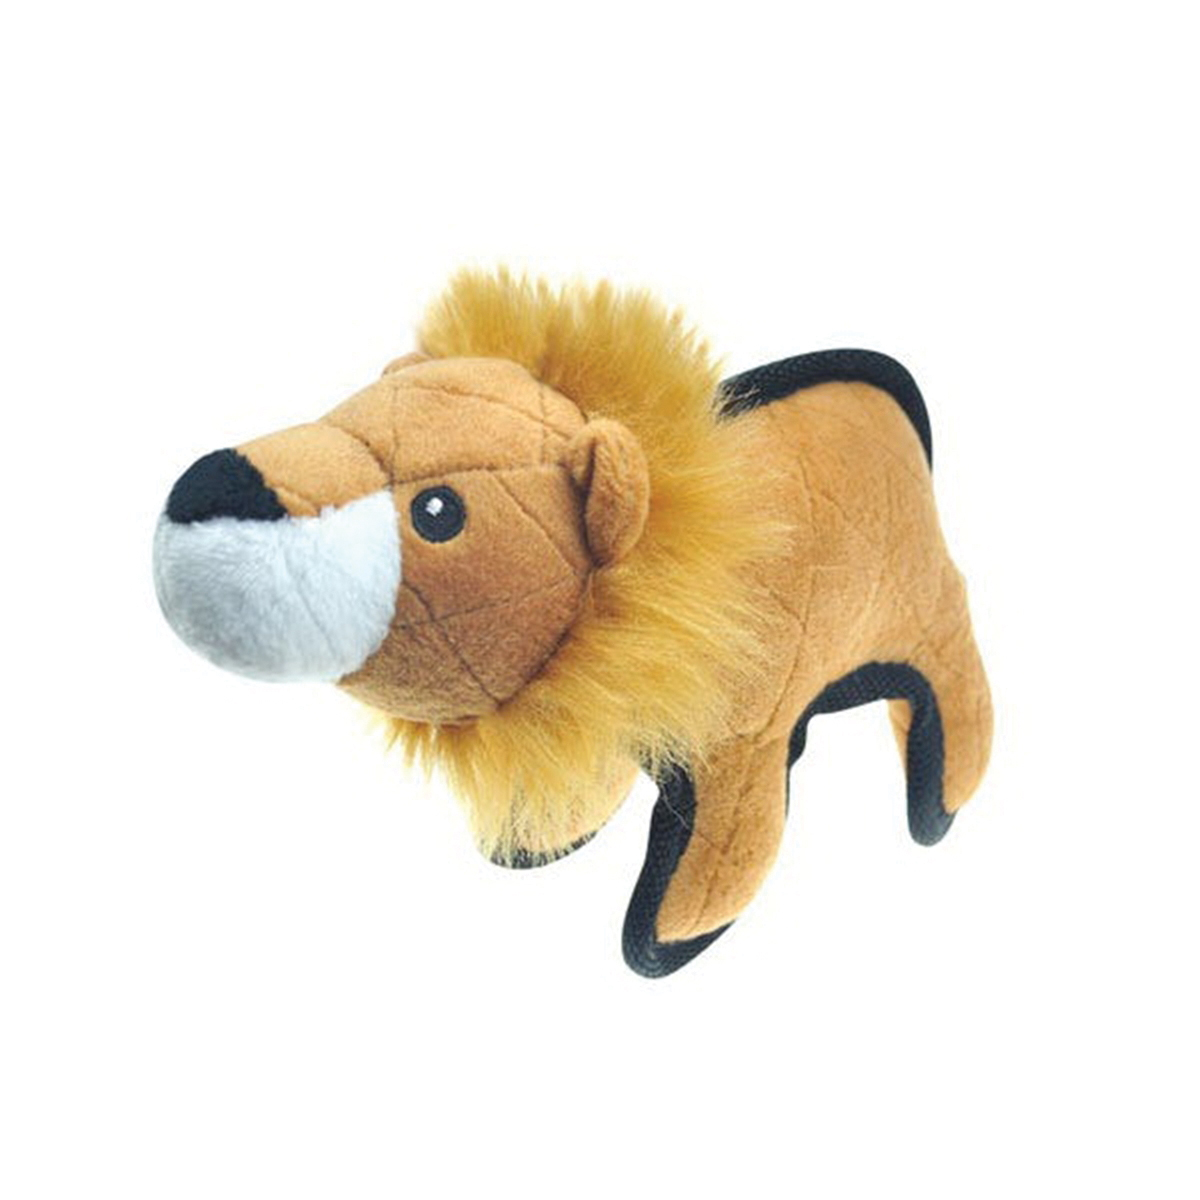 US2021 14 13 Dog Toy, S, Chew Toy, Tuffimals Lion